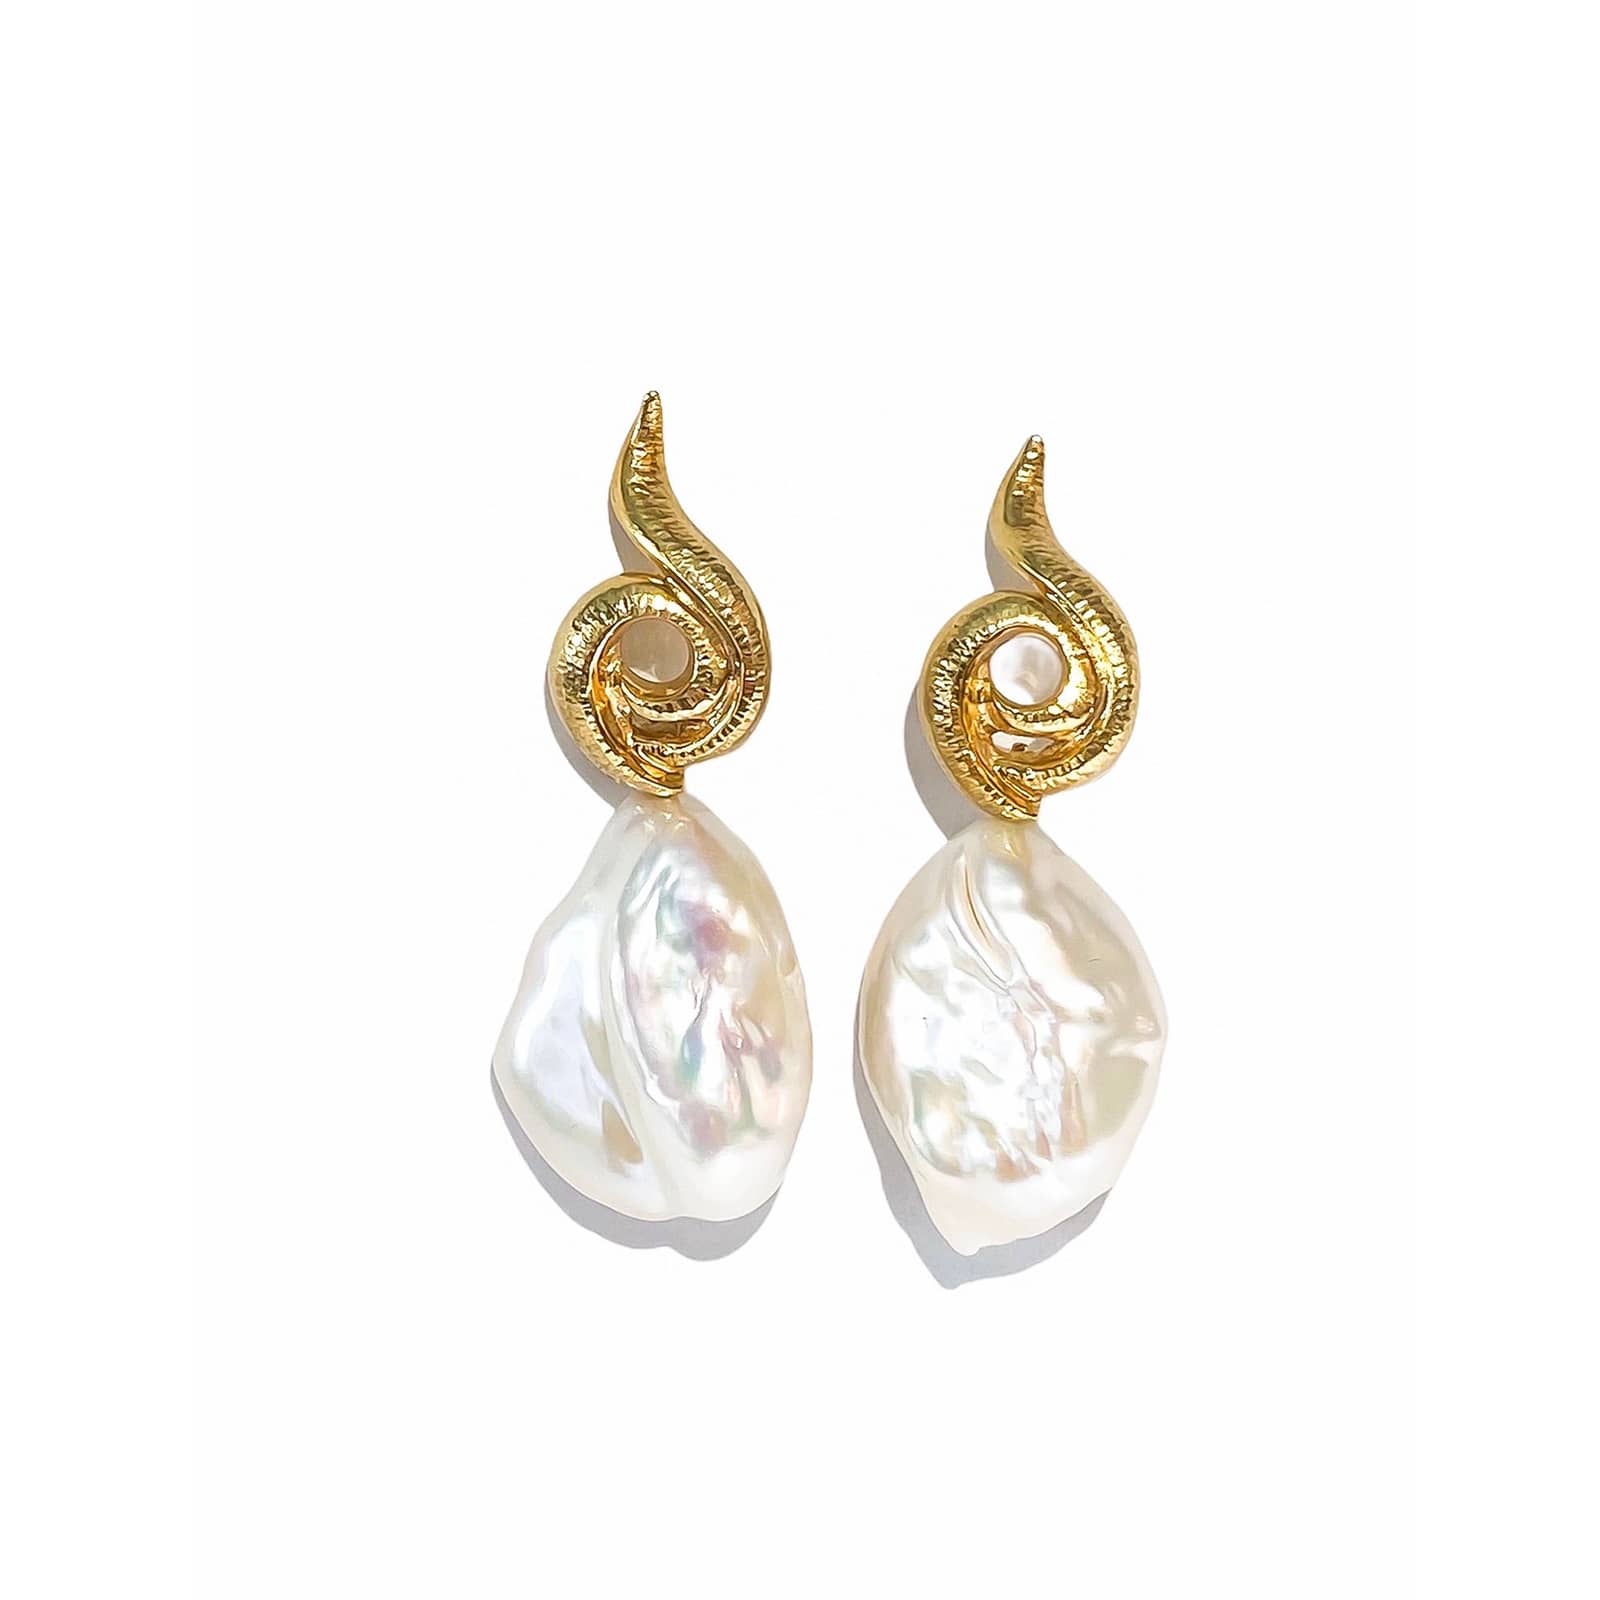 Surrea Baroque gold plated silver earrings.